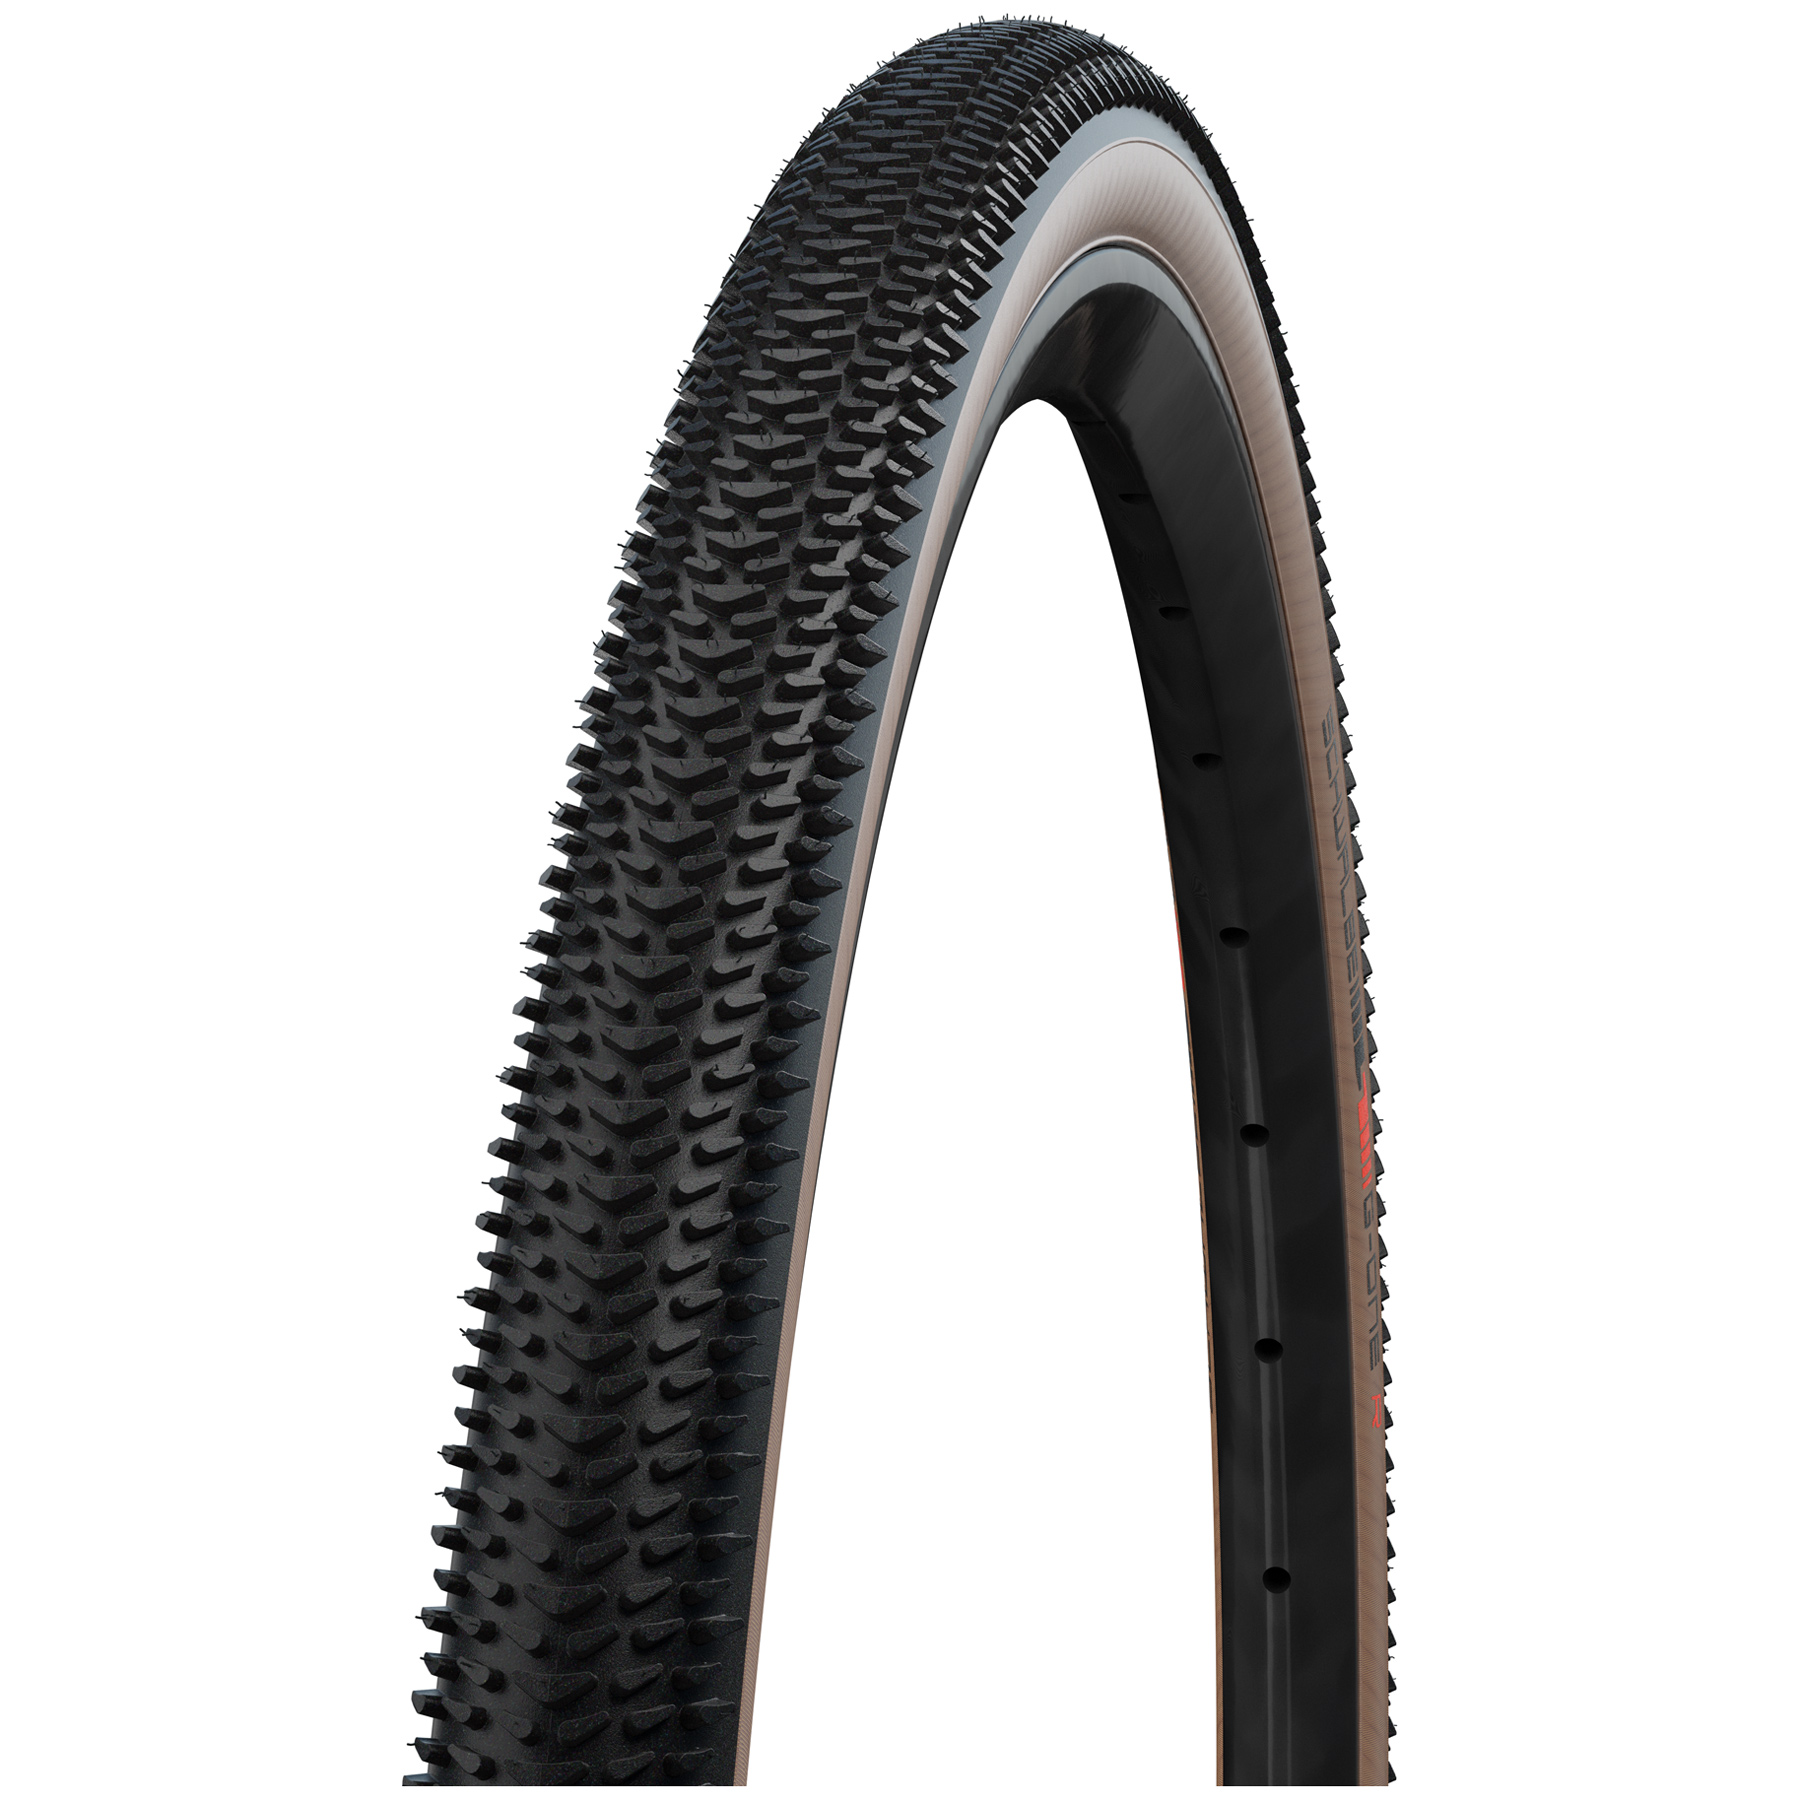 Picture of Schwalbe G-One R Folding Tire - Gravel | Evolution | Addix Race | Super Race | TLEasy - E25 - 45-622 | Transparent Sidewall